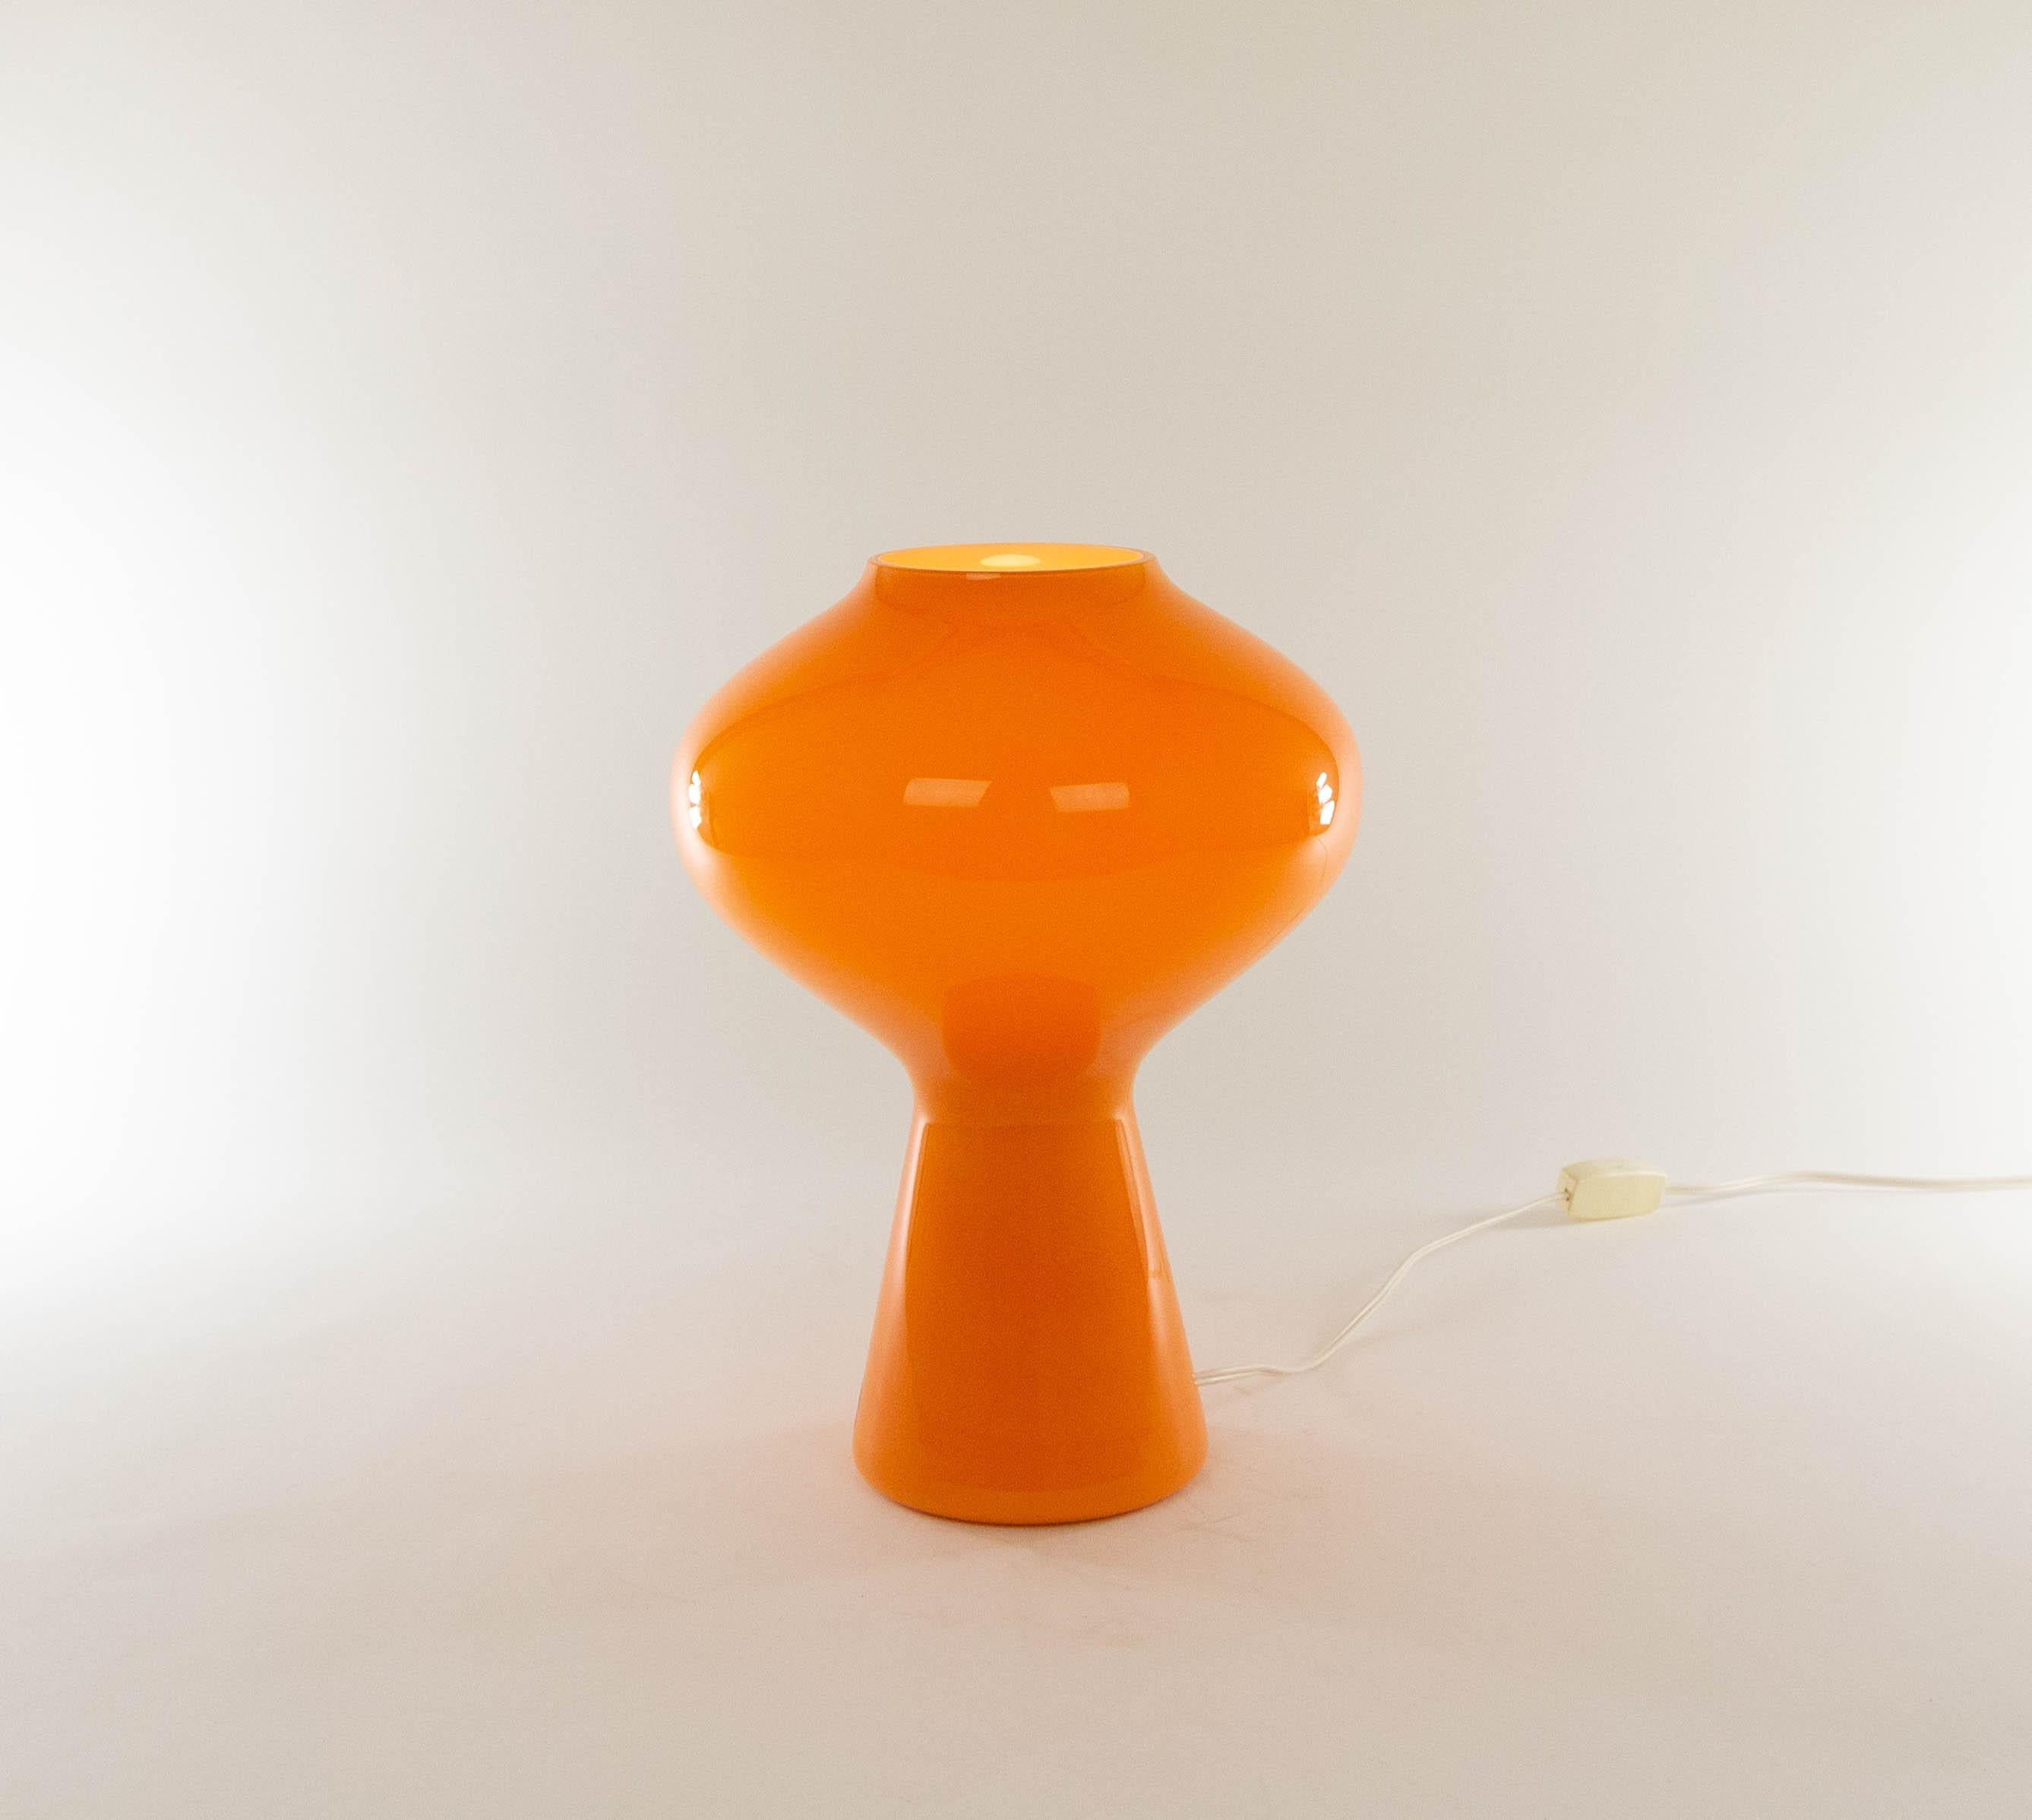 A hand blown orange colored glass Fungo table lamp designed by Massimo Vignelli at the start of his impressive career in design and executed by Murano glass specialist Venini. This is the largest size of the Fungo table lamp.

The Fungo lamp is